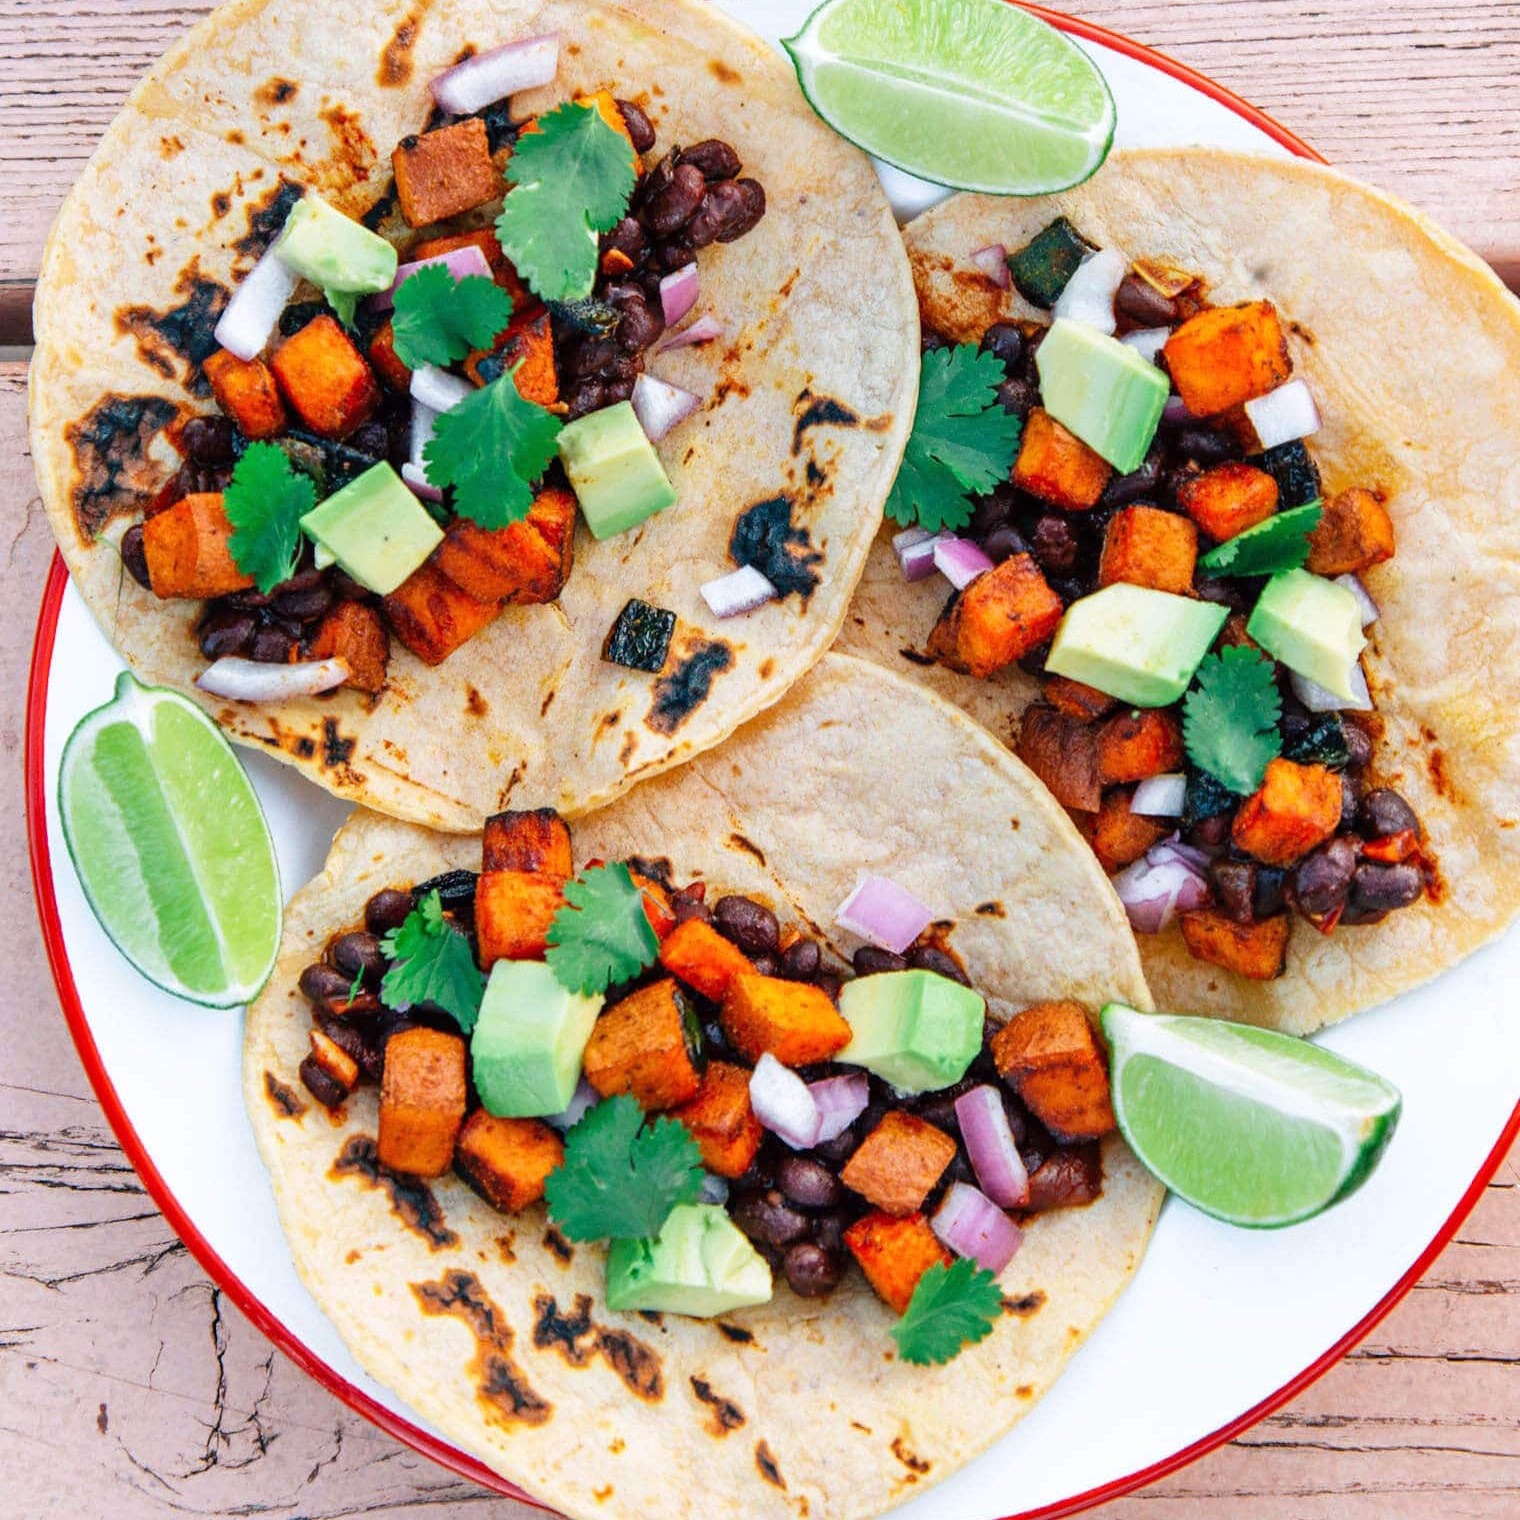 Three tacos on a plate filled with black beans, sweet potato, and avocado